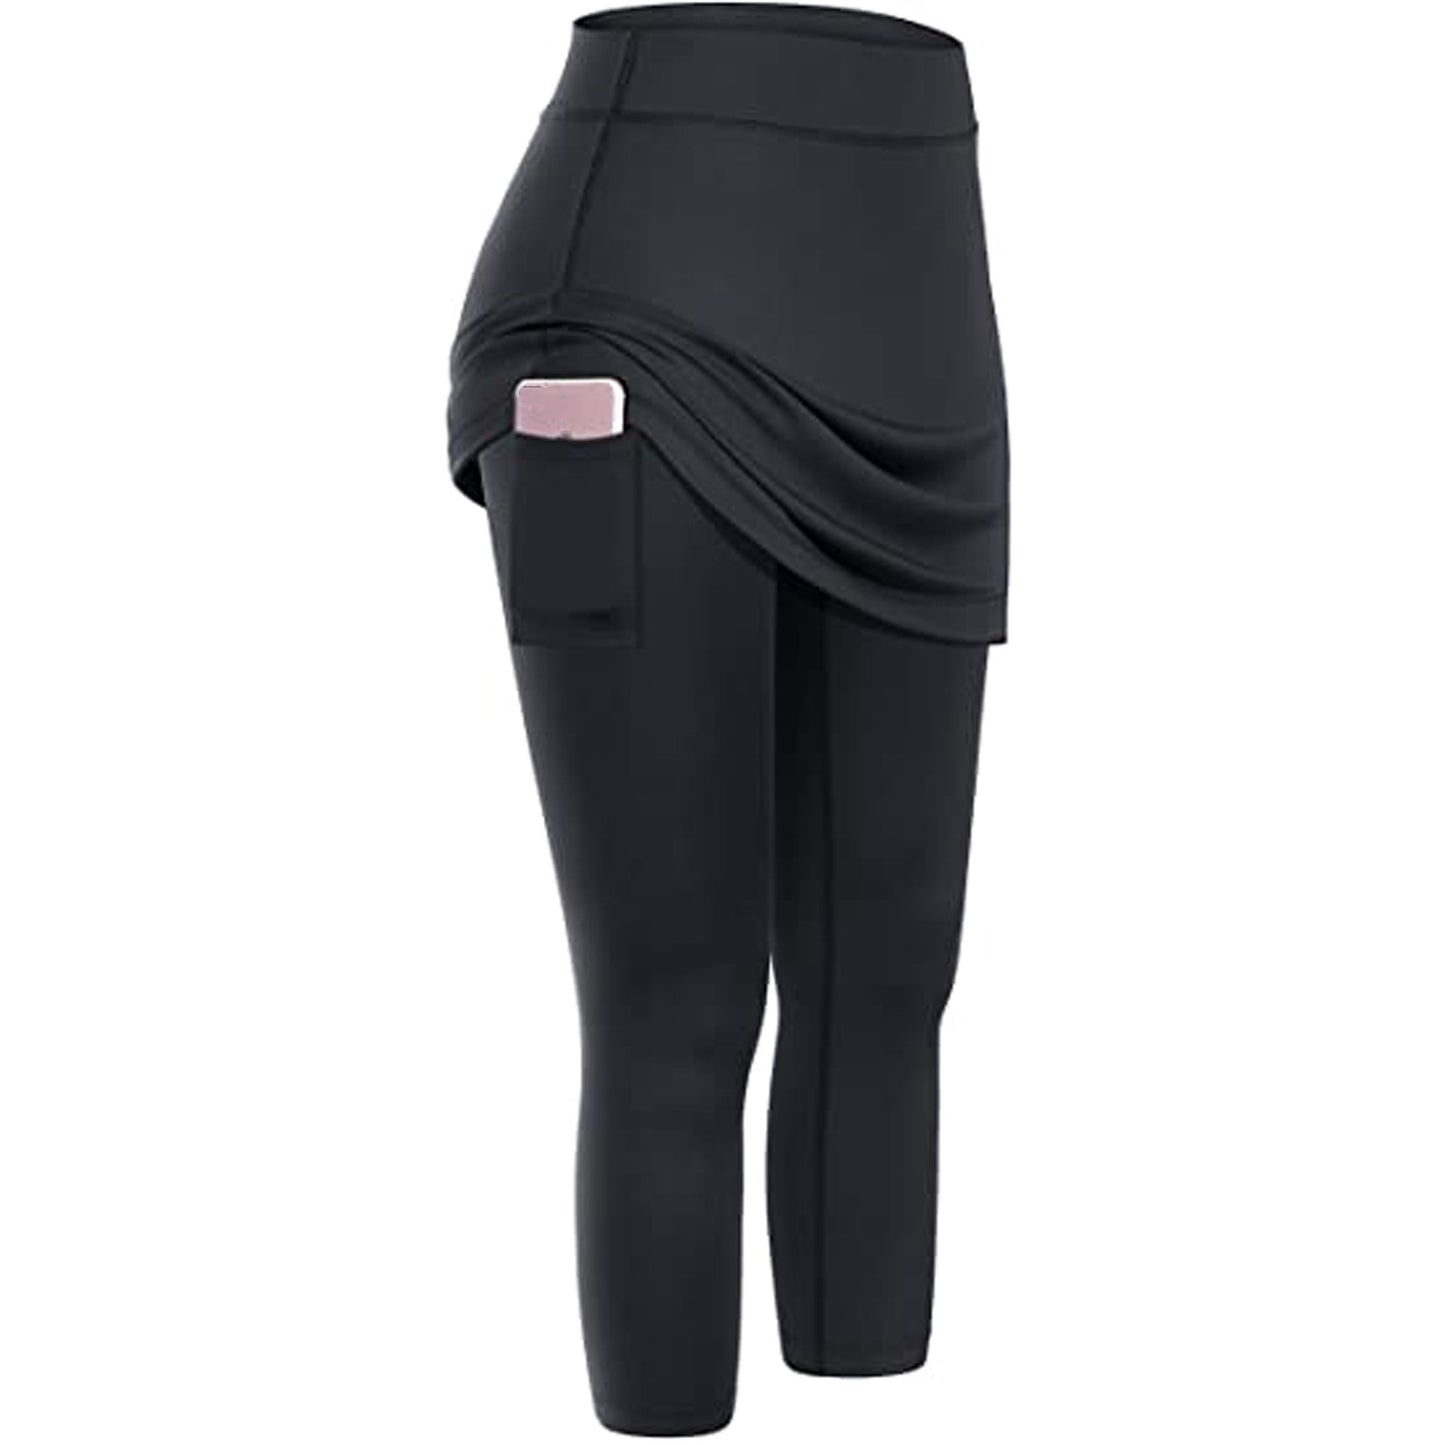 Women Leggings With Pockets Yoga Fitness Pants Sports